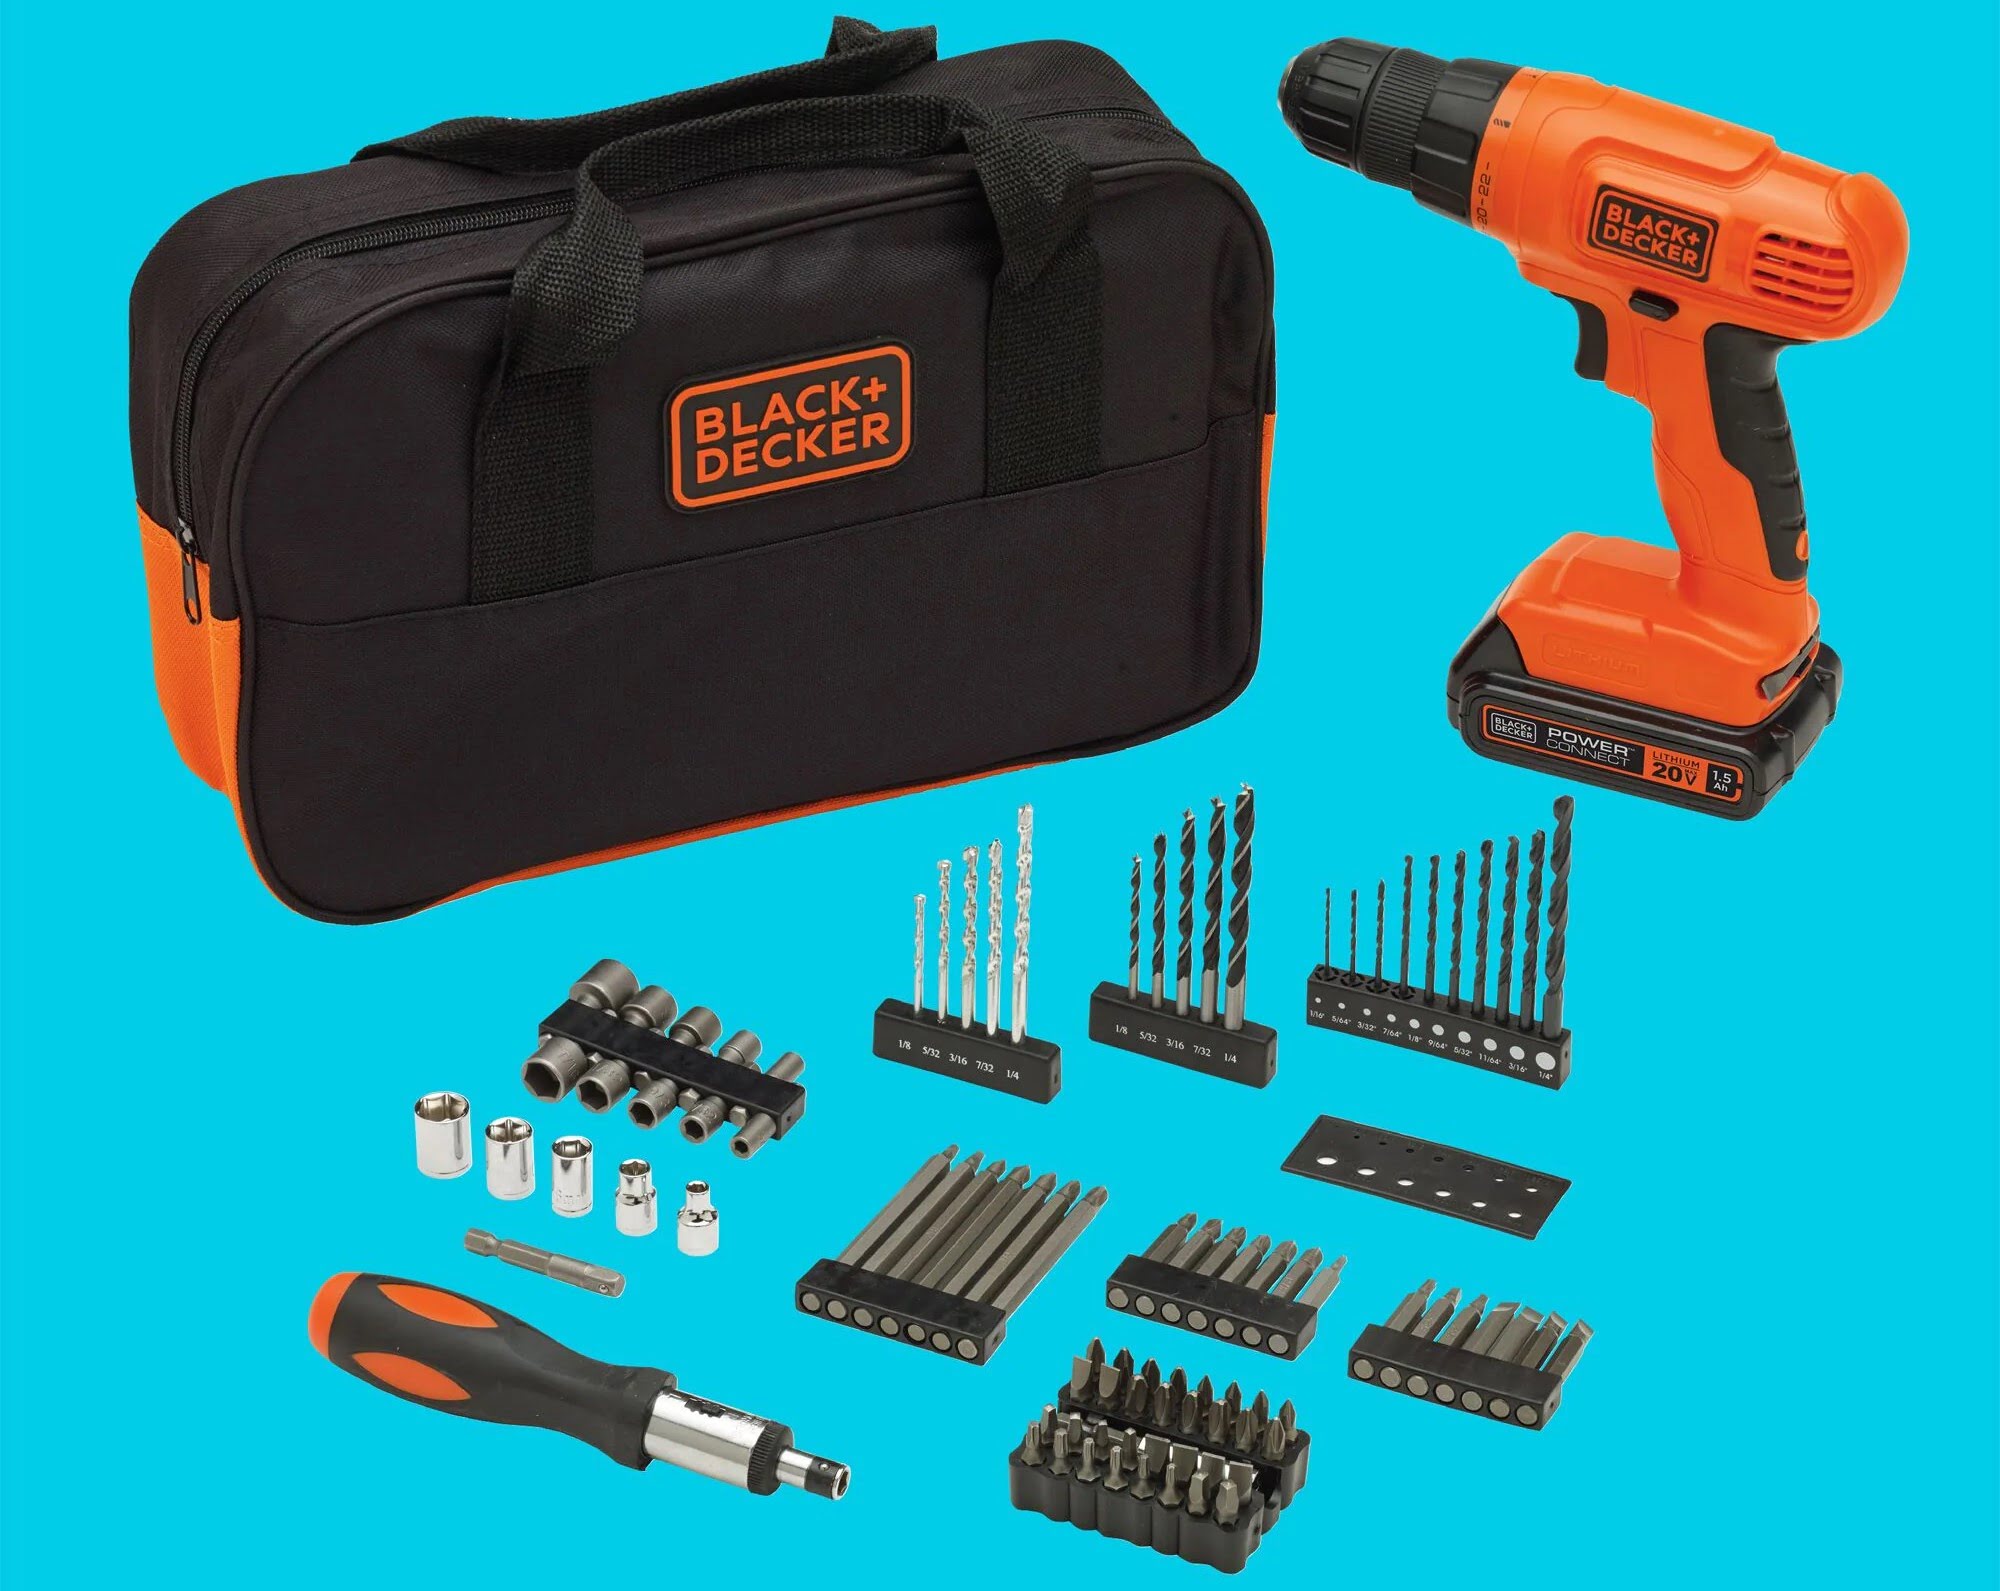 Drill Set Review: The Best Tools for Your DIY Projects